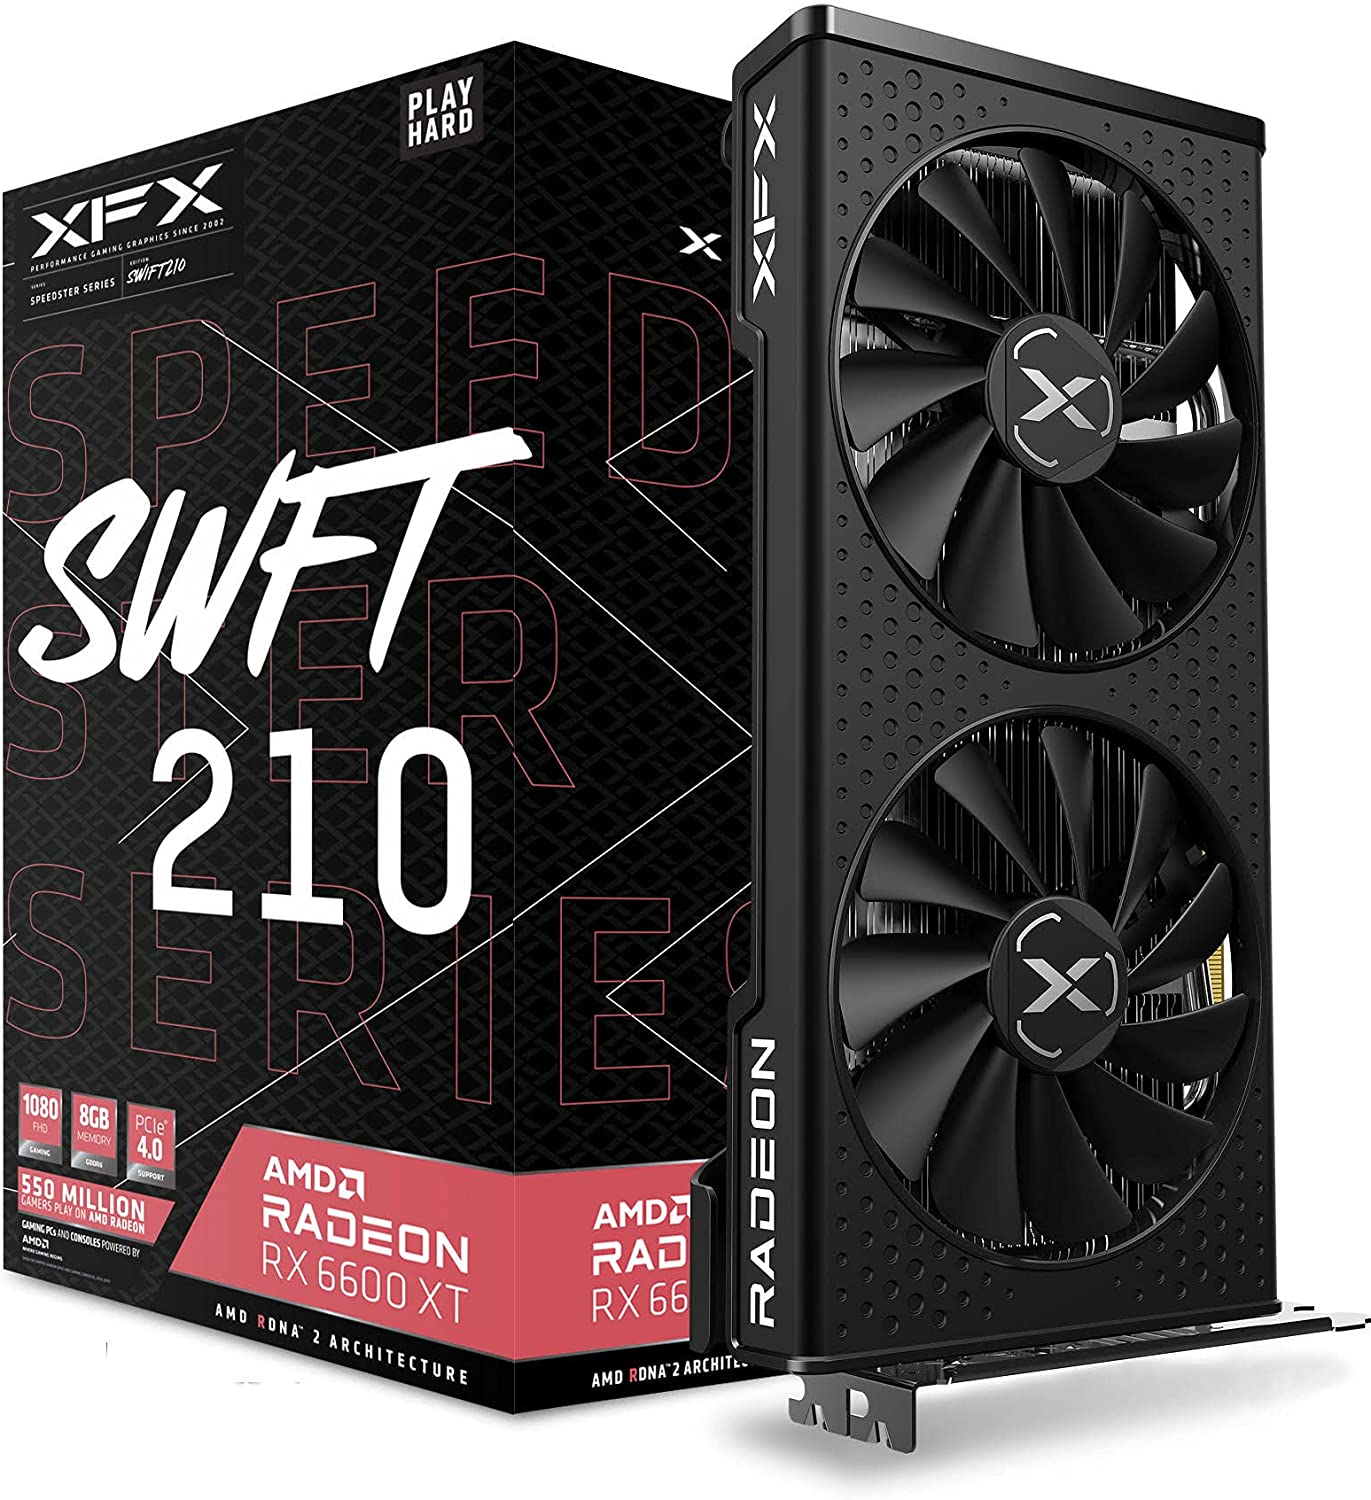 8GB XFX Speedster SWFT210 Radeon RX 6600 XT CORE Gaming Graphics Card $380 + free s/h at Amazon